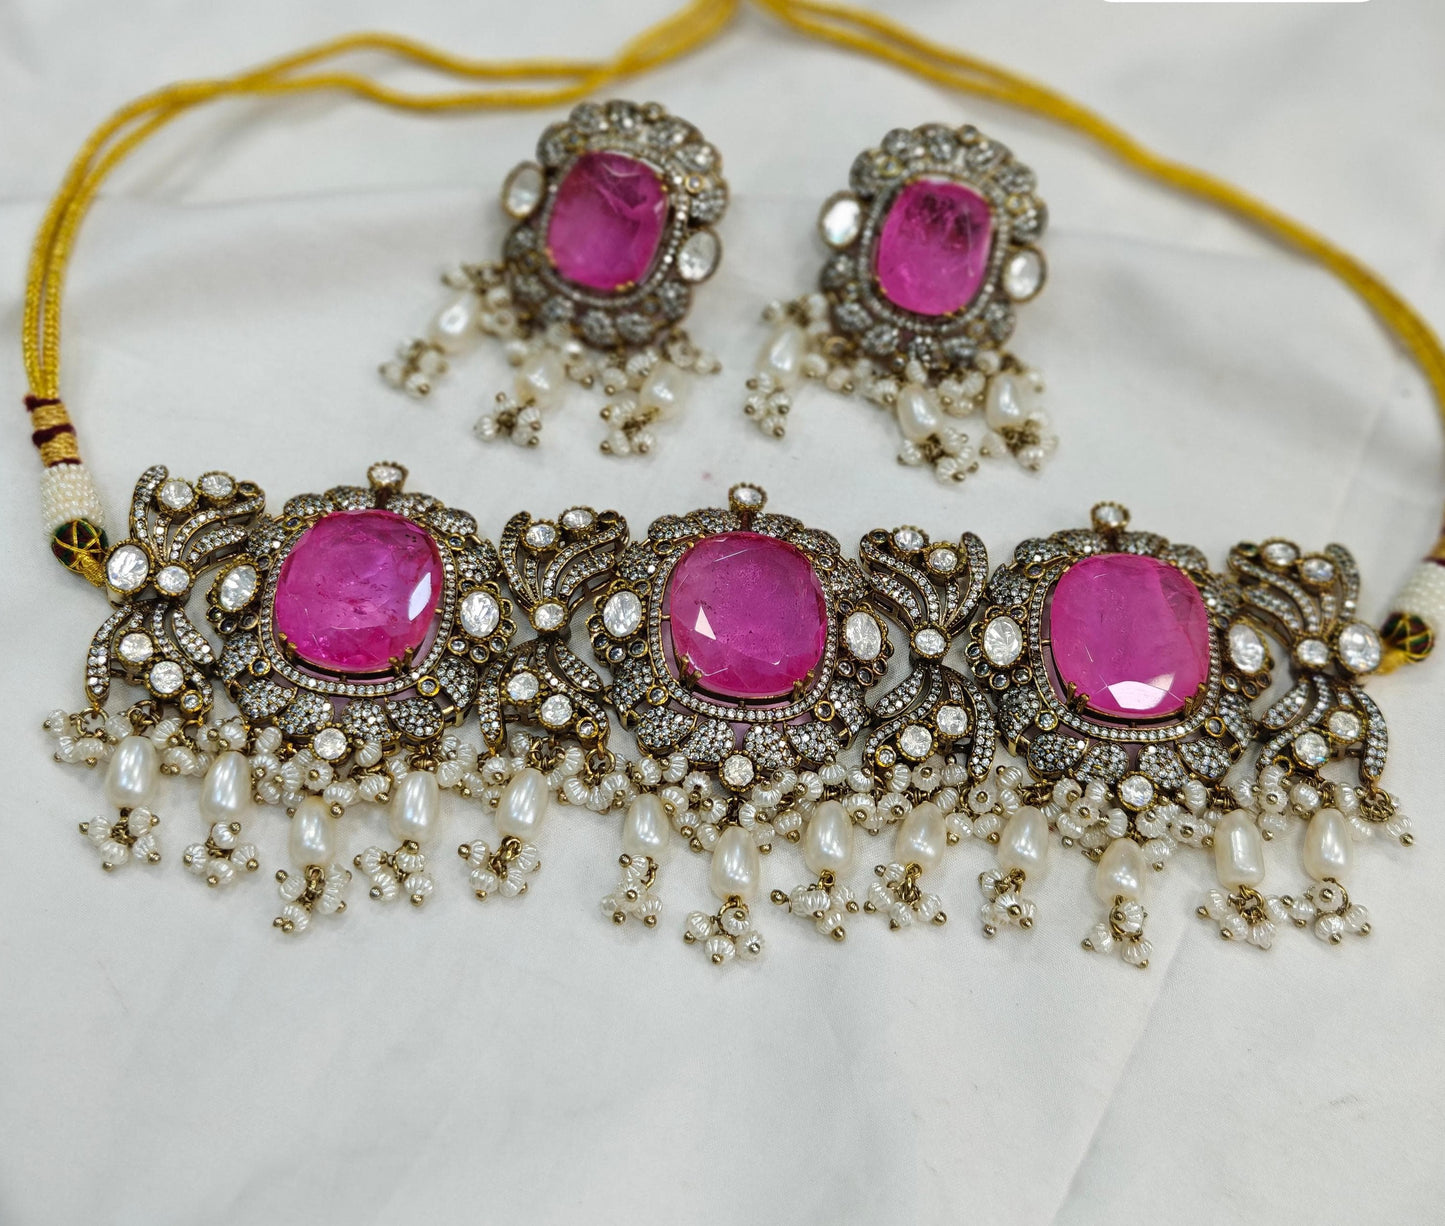 Premium Quality Victorian Kundan Choker Jewelry Set with Large Stones and Matching Earrings